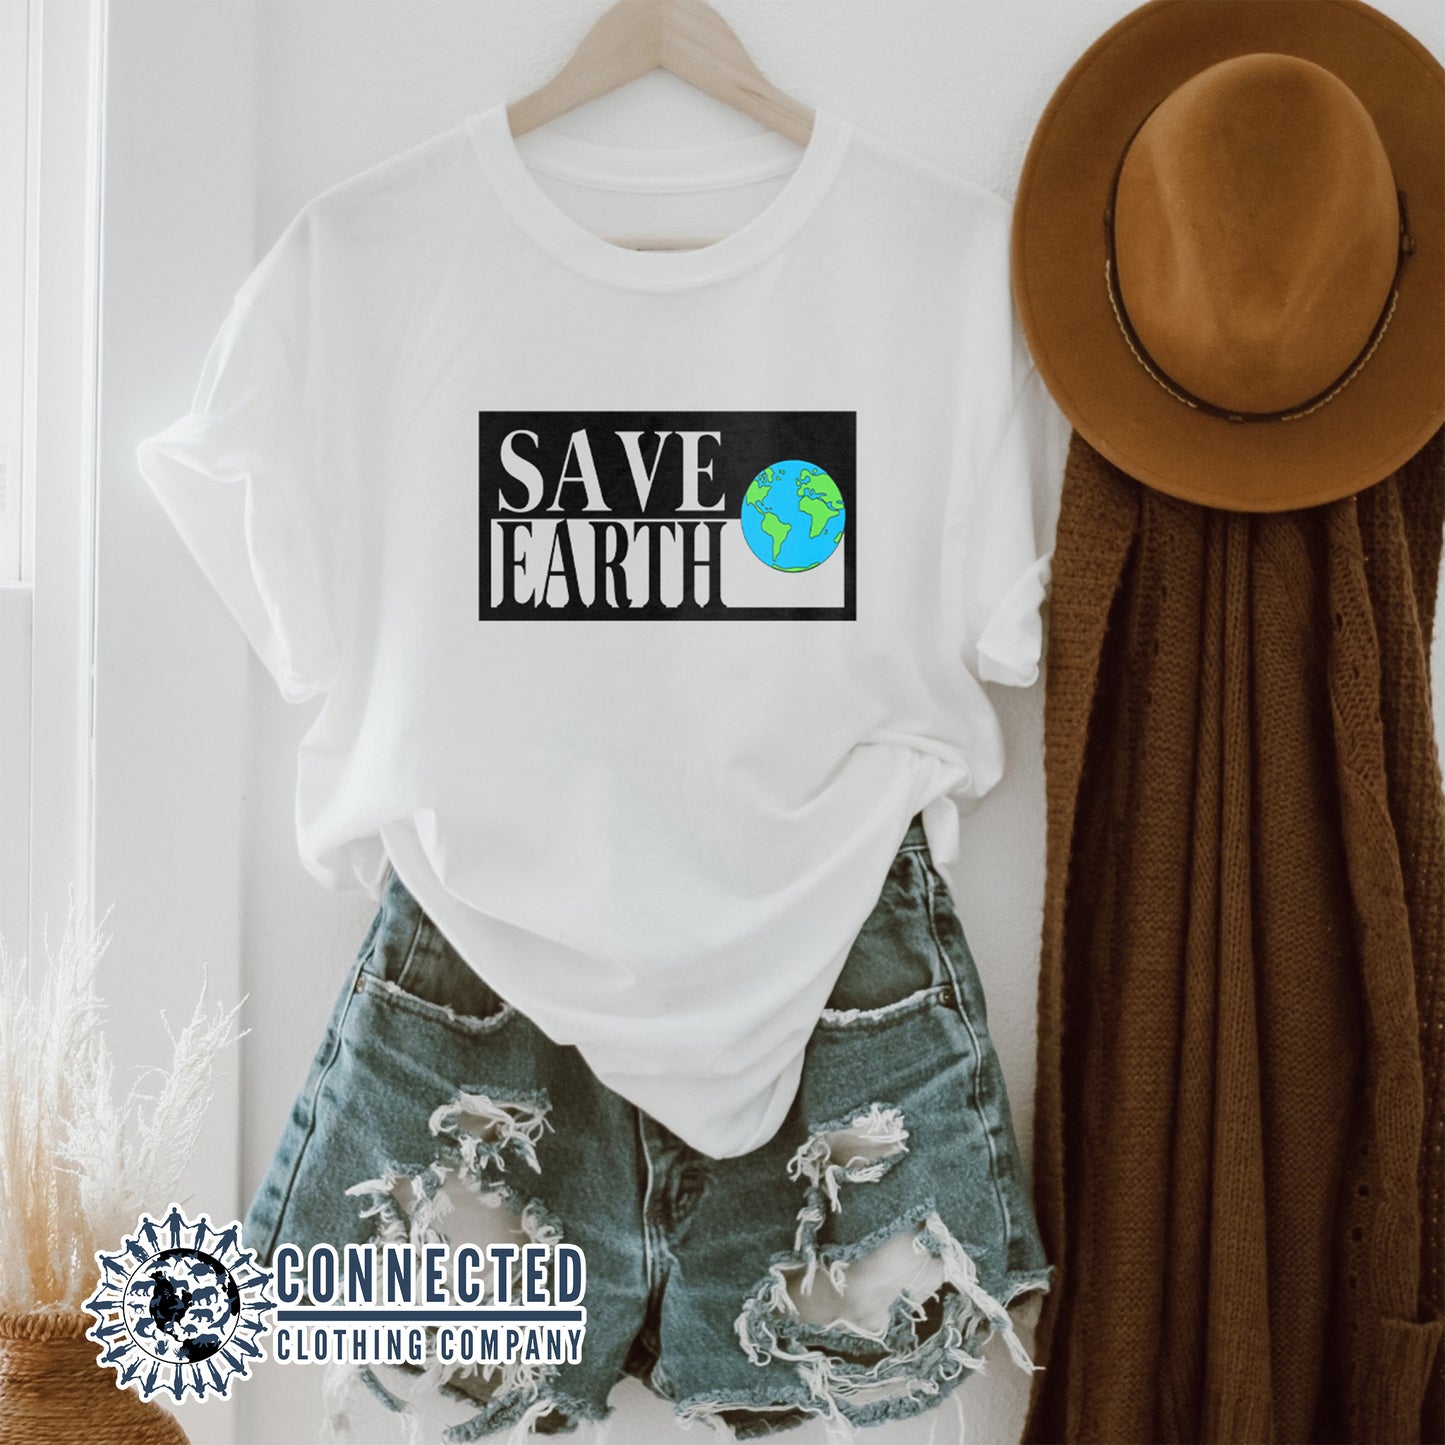 White Save Earth Short-Sleeve T-shirt - Connected Clothing Company - Ethically and Sustainably Made - 50% donated to WIRES Wildlife Rescue